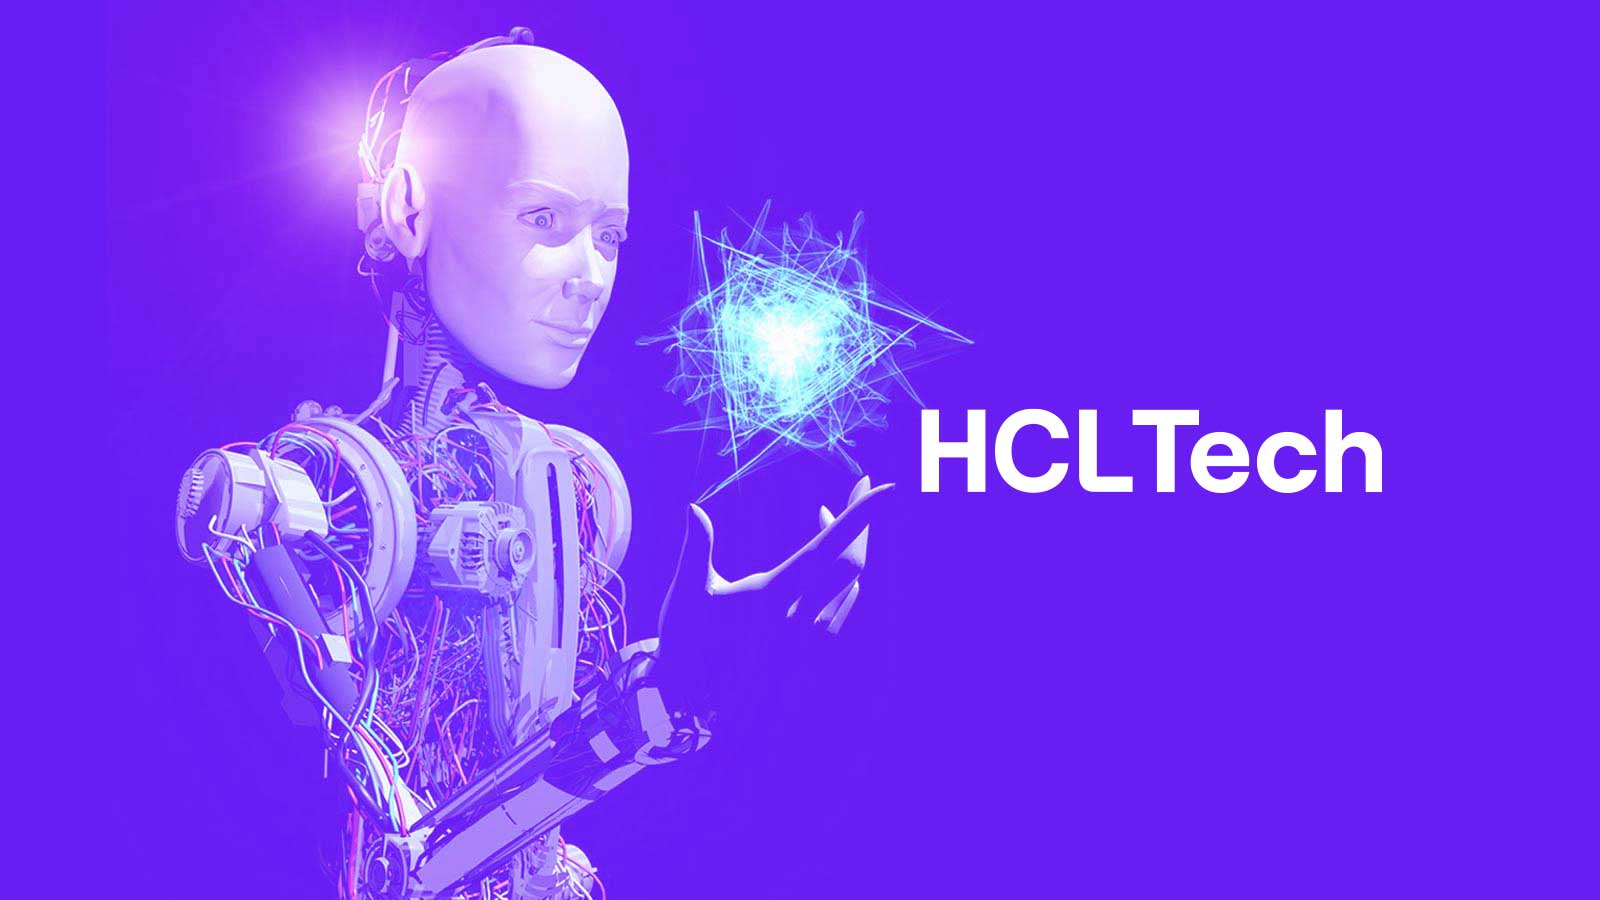 HCLTech and Arm Collaborate on Custom Silicon Chips Optimized for AI Workloads